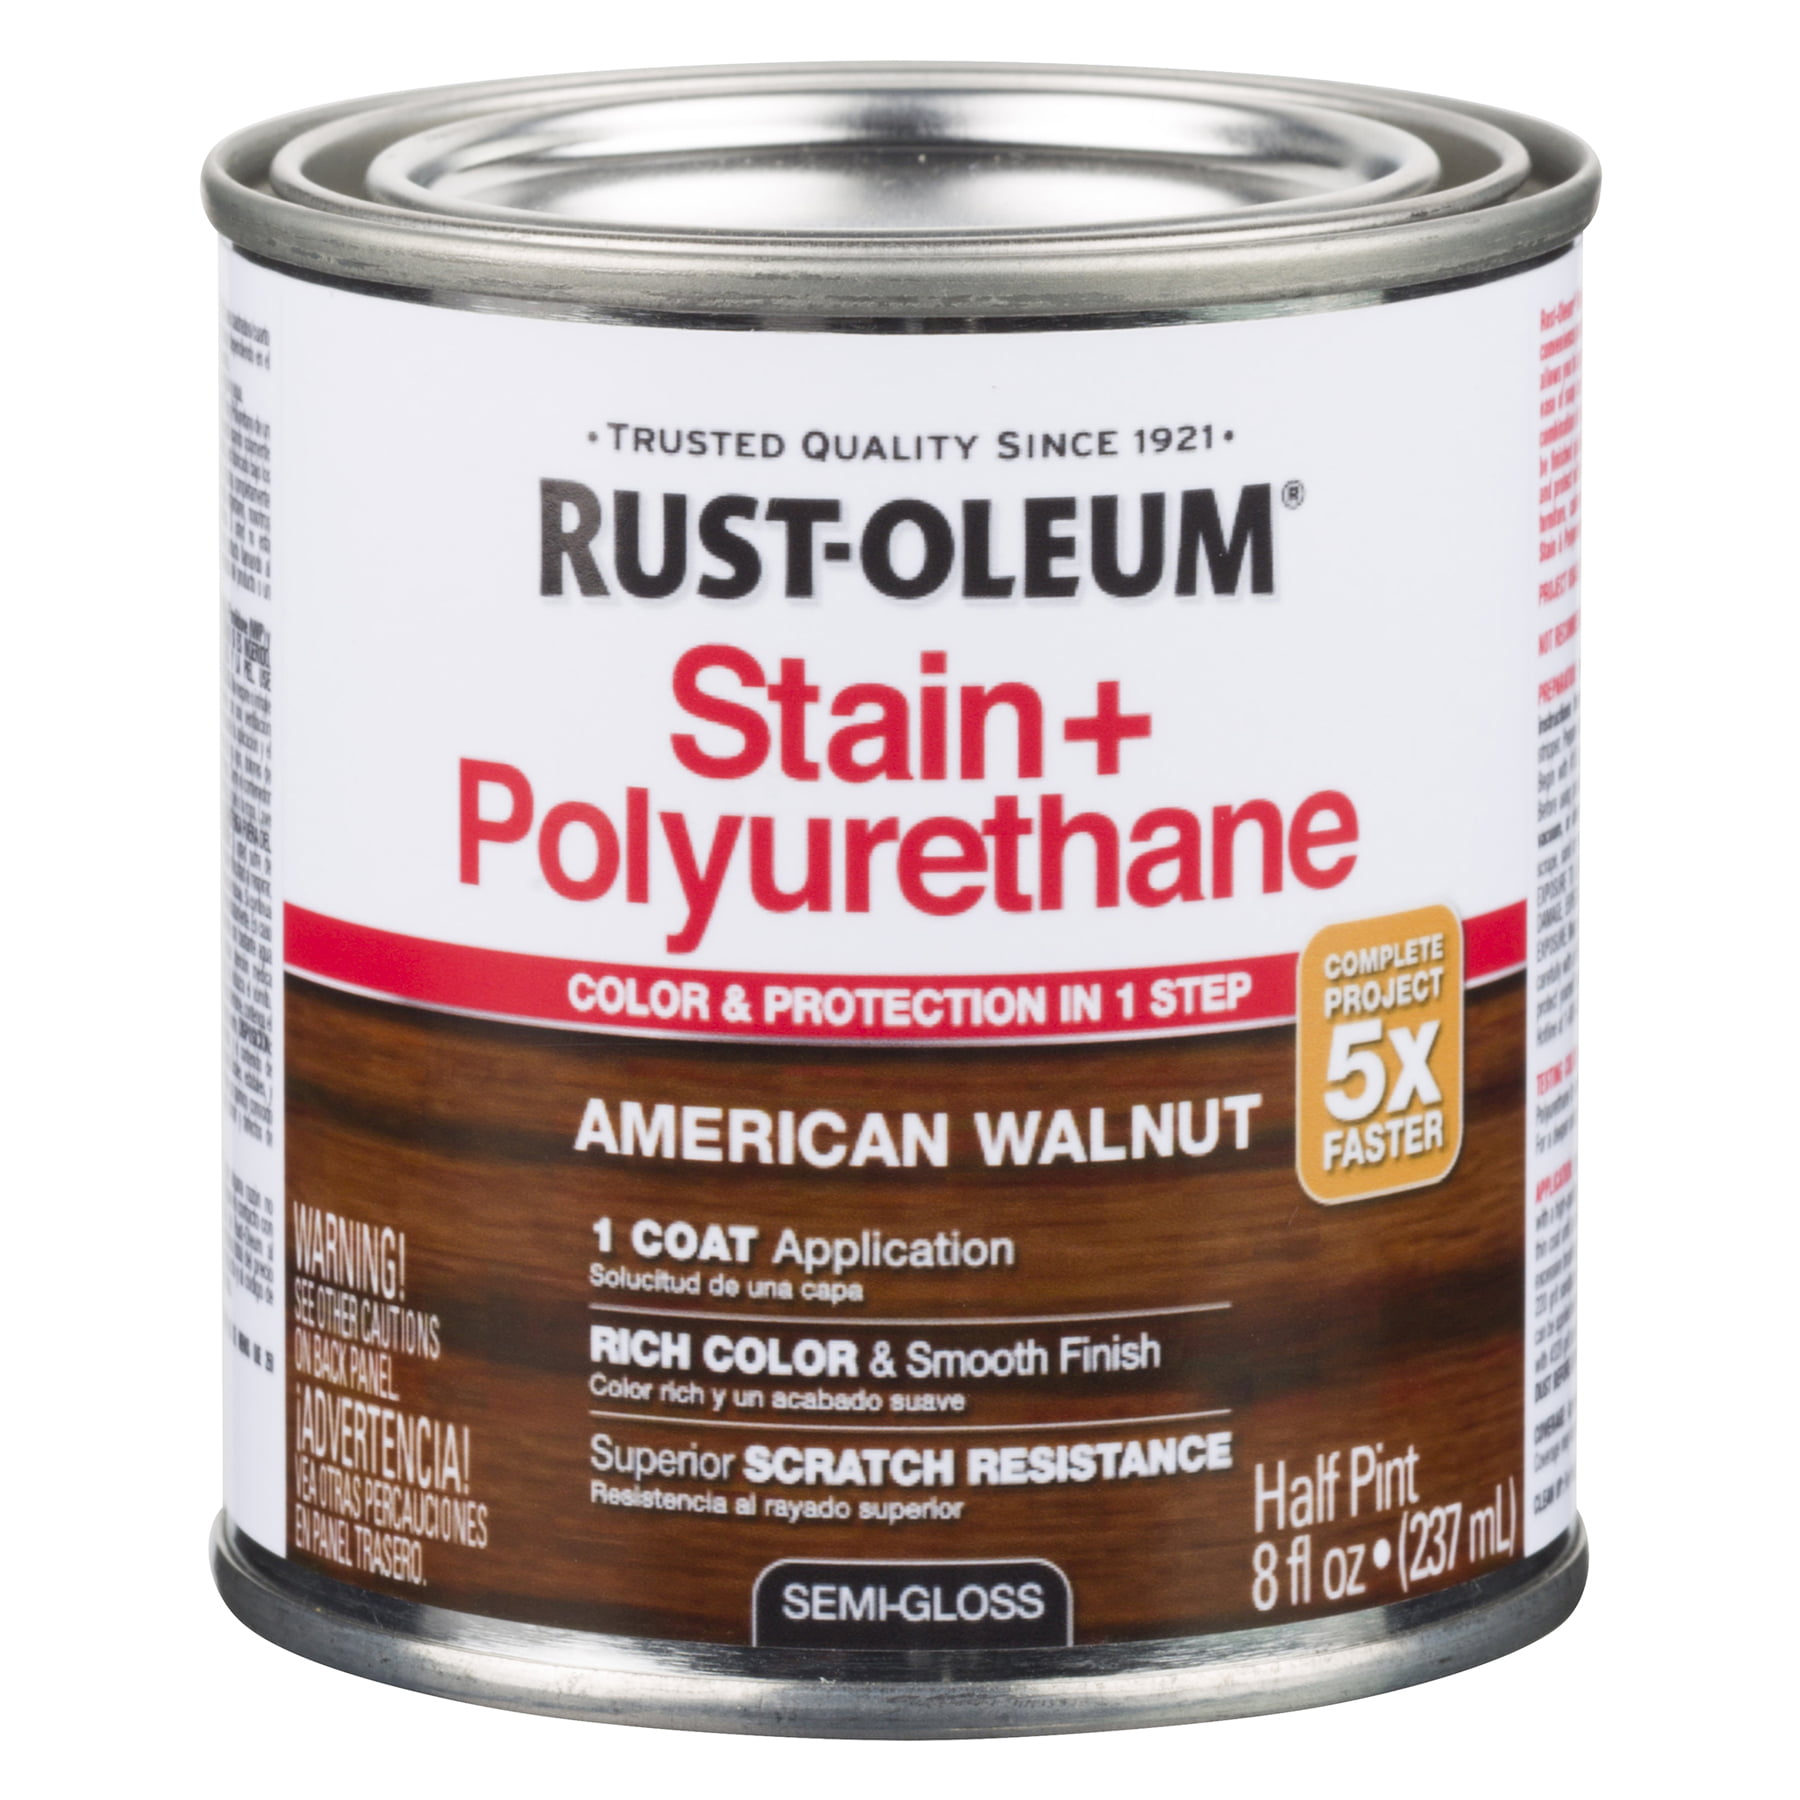 Stain and Polyurethane American Walnut Stain and Polyurethane Early Am